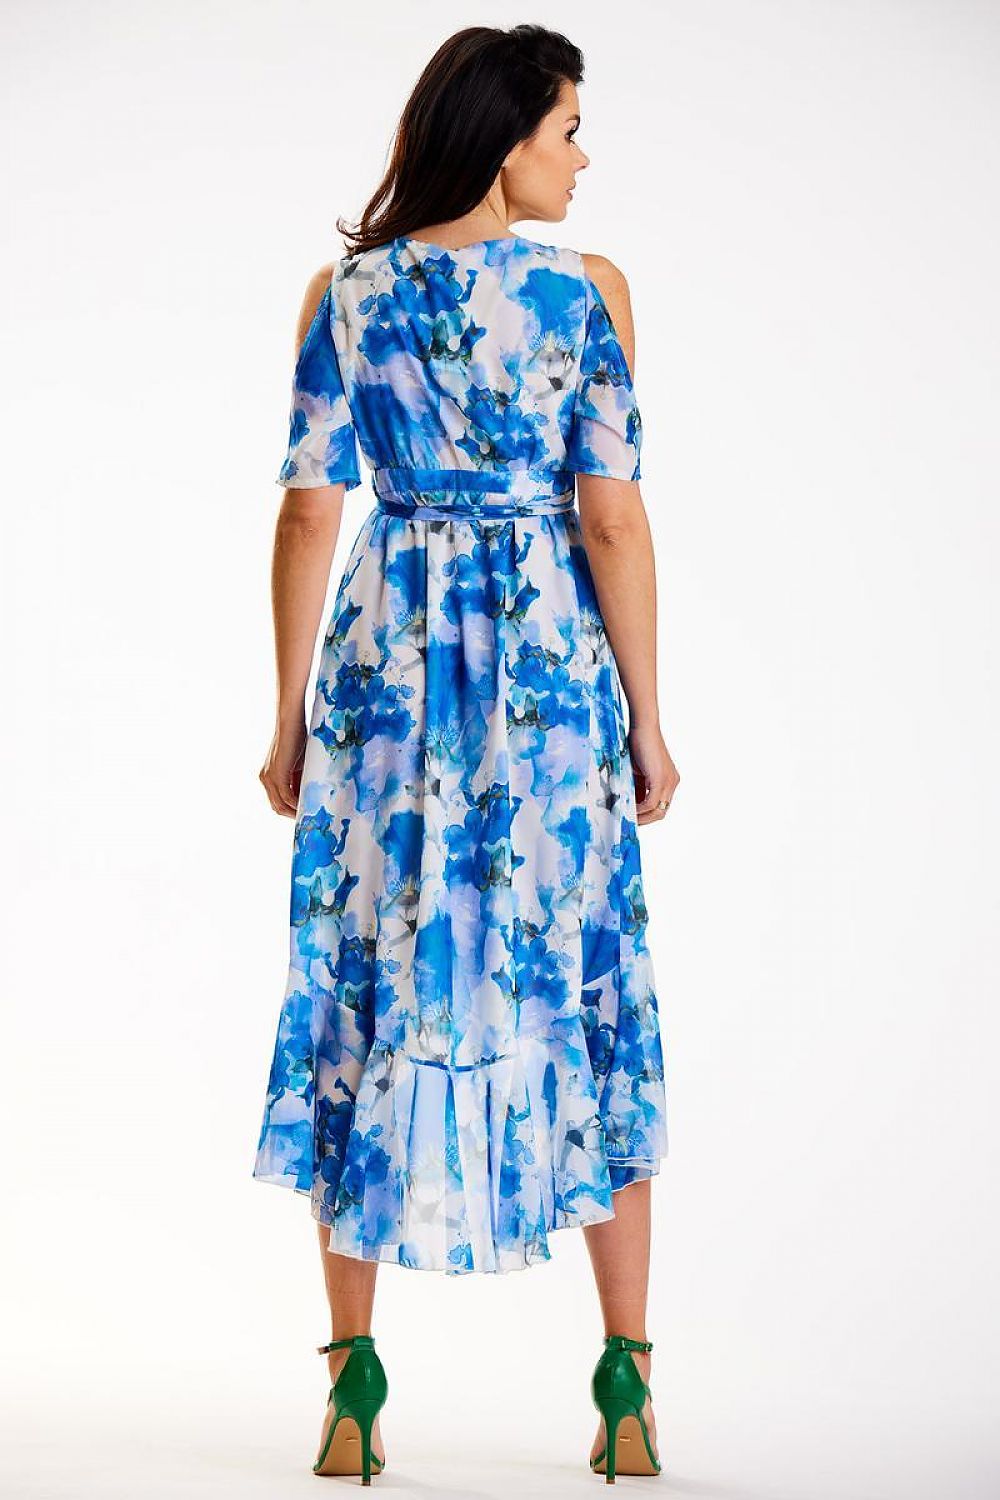 Awama Exposed Shoulder Asymetrical Dress Floral Blue